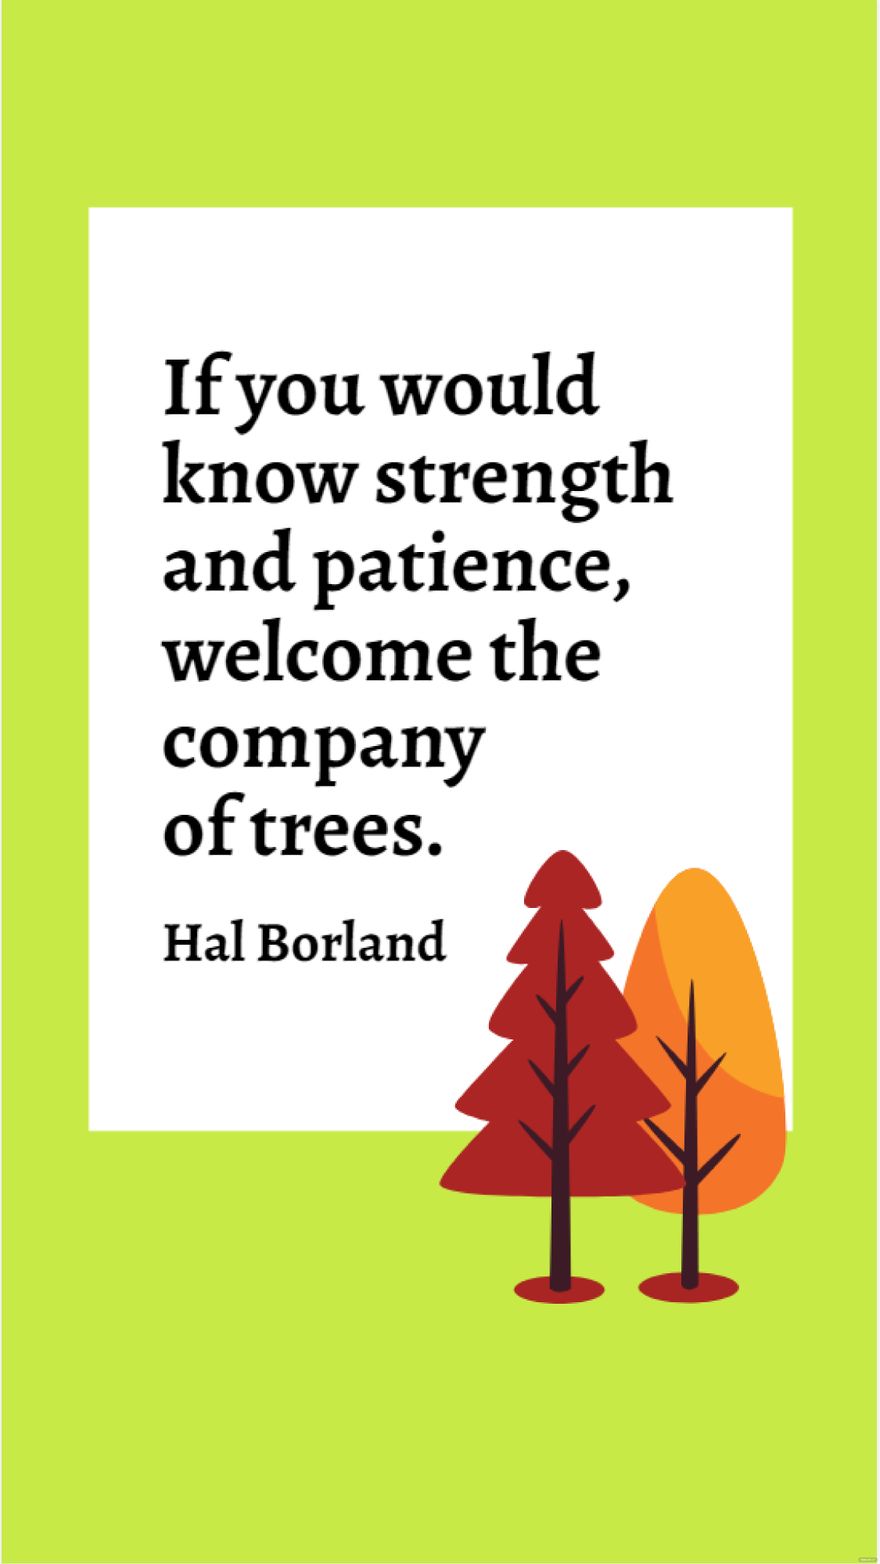 Hal Borland - If you would know strength and patience, welcome the company of trees.